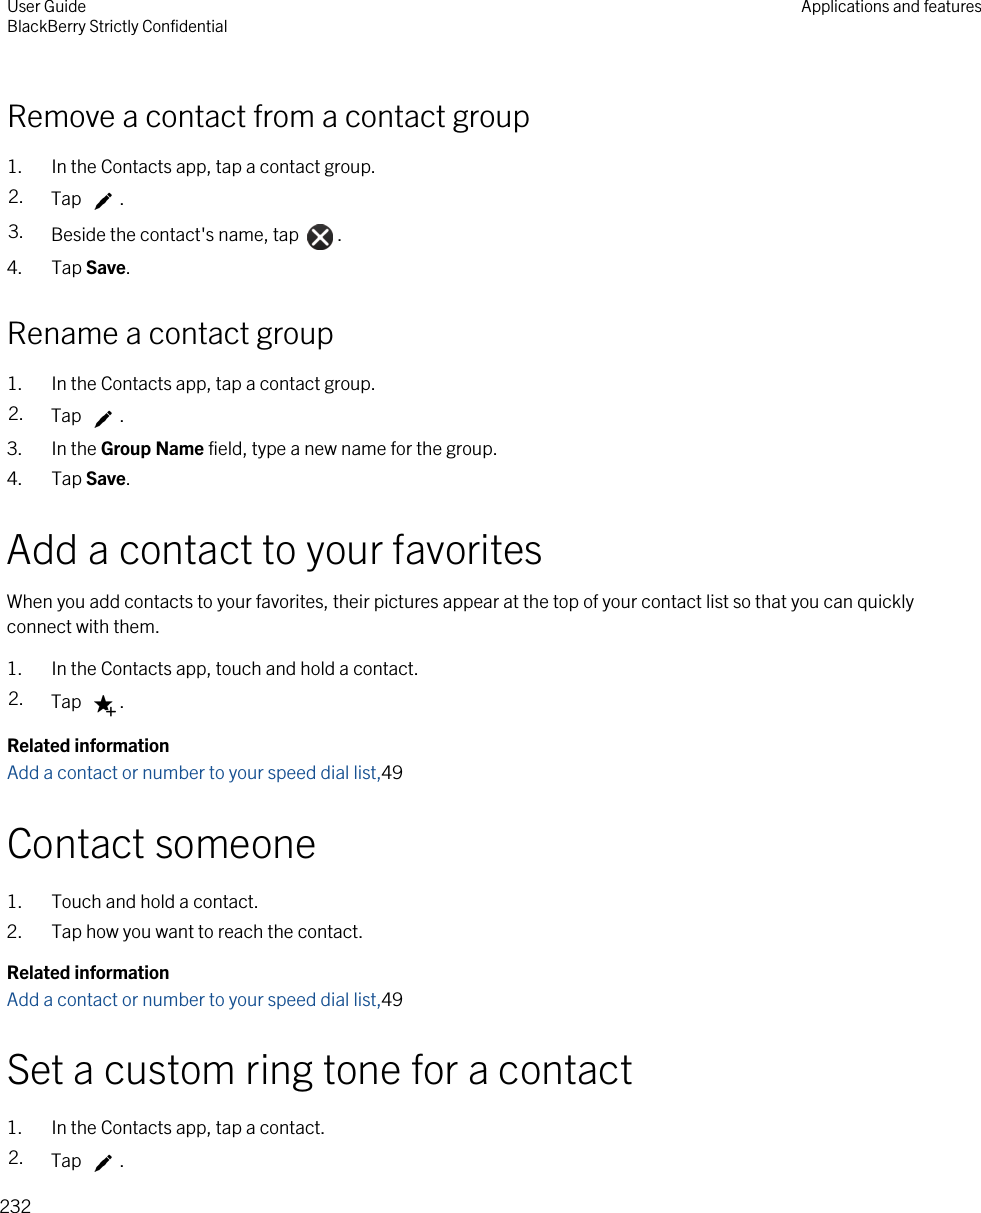 Remove a contact from a contact group1. In the Contacts app, tap a contact group.2. Tap  .3. Beside the contact&apos;s name, tap  .4. Tap Save.Rename a contact group1. In the Contacts app, tap a contact group.2. Tap  .3. In the Group Name field, type a new name for the group.4. Tap Save.Add a contact to your favoritesWhen you add contacts to your favorites, their pictures appear at the top of your contact list so that you can quickly connect with them.1. In the Contacts app, touch and hold a contact.2. Tap  .Related informationAdd a contact or number to your speed dial list,49Contact someone1. Touch and hold a contact.2. Tap how you want to reach the contact.Related informationAdd a contact or number to your speed dial list,49Set a custom ring tone for a contact1. In the Contacts app, tap a contact.2. Tap  .User GuideBlackBerry Strictly Confidential Applications and features232